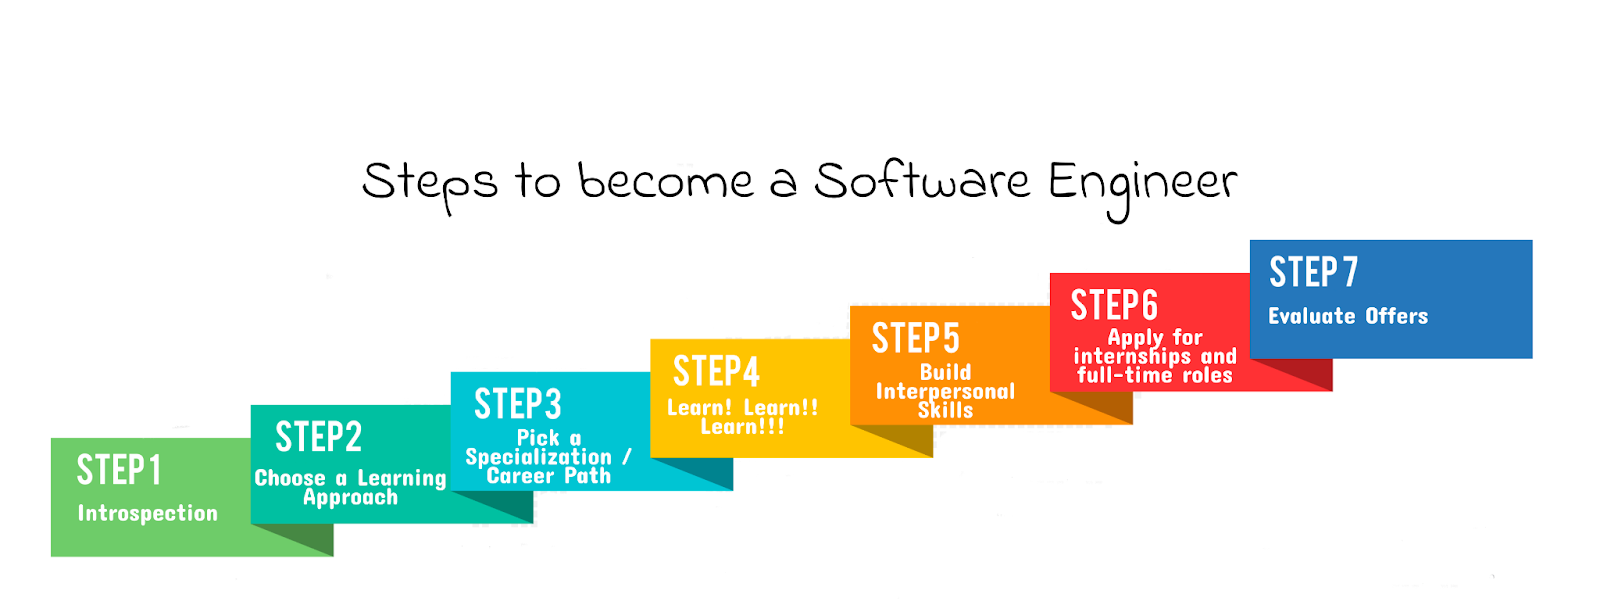 Steps to become a Software Engineer